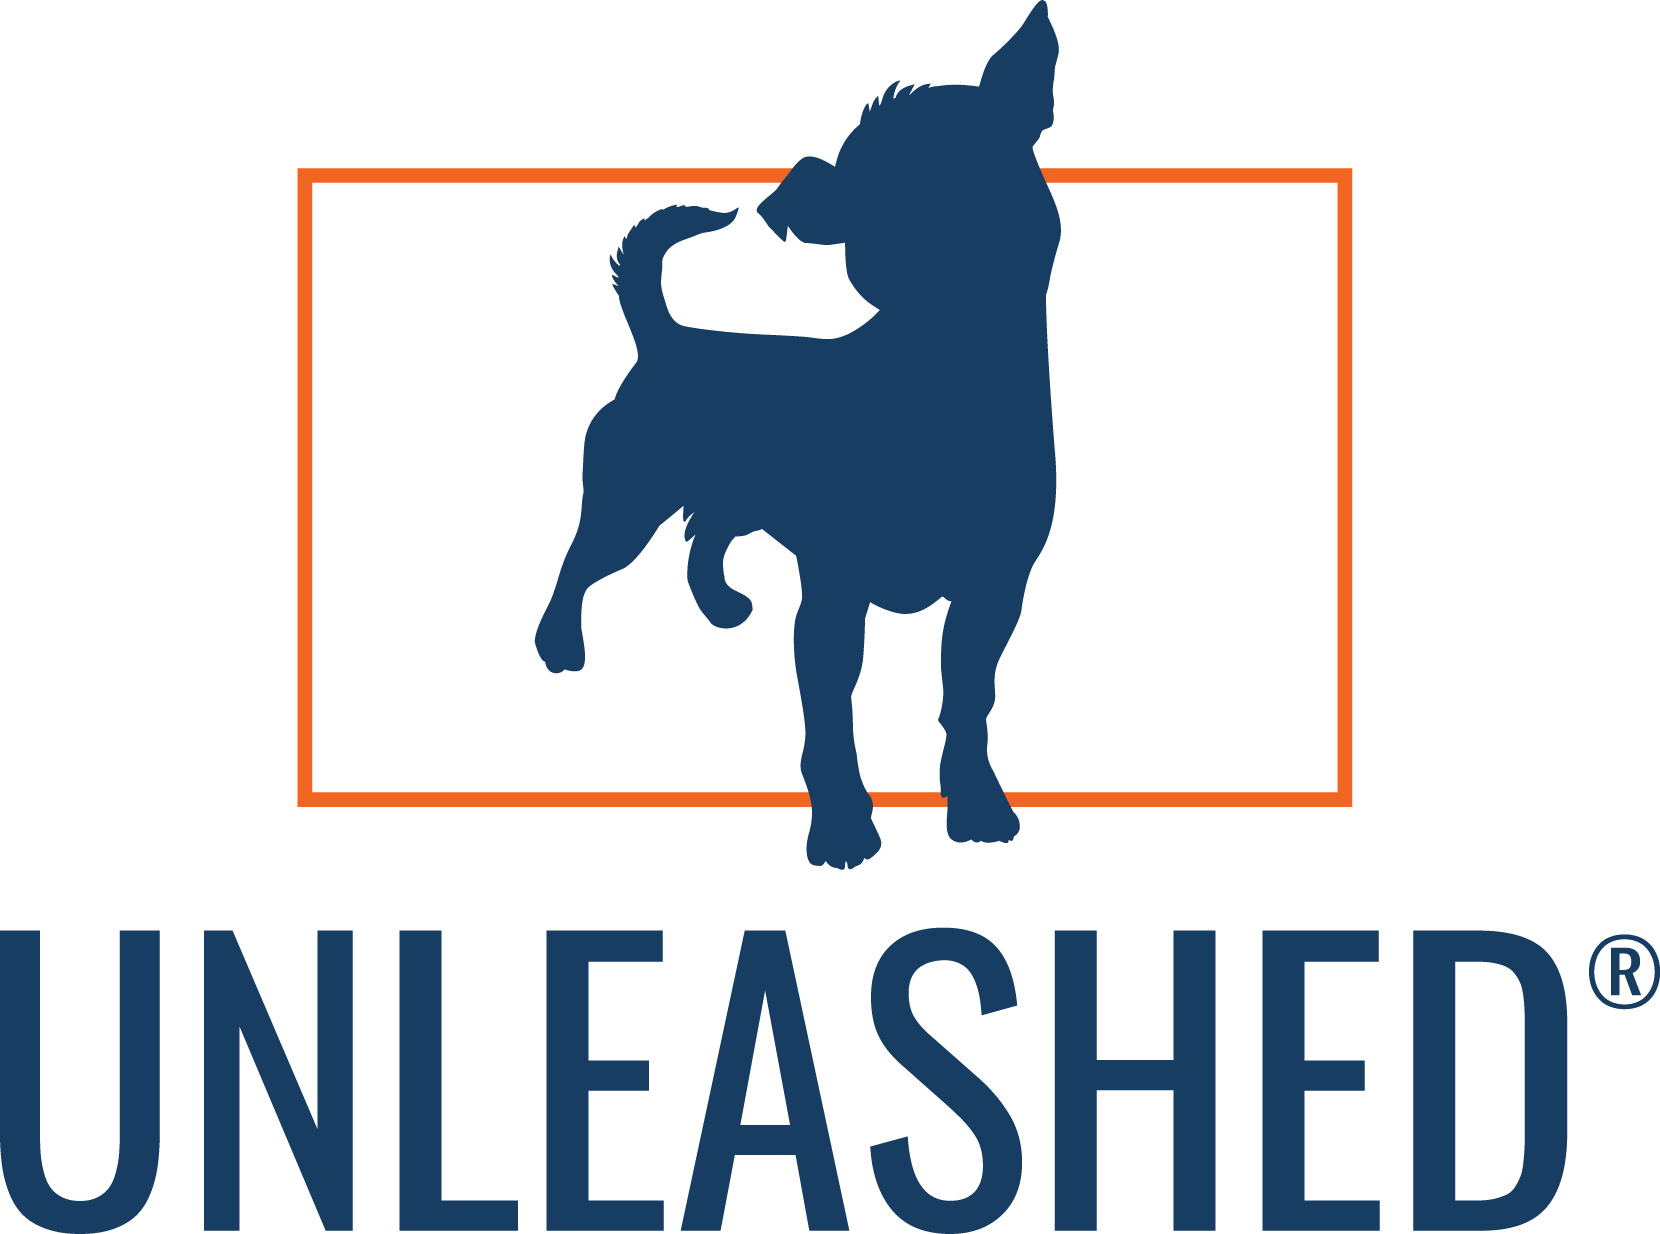 Unleashed, the podcast